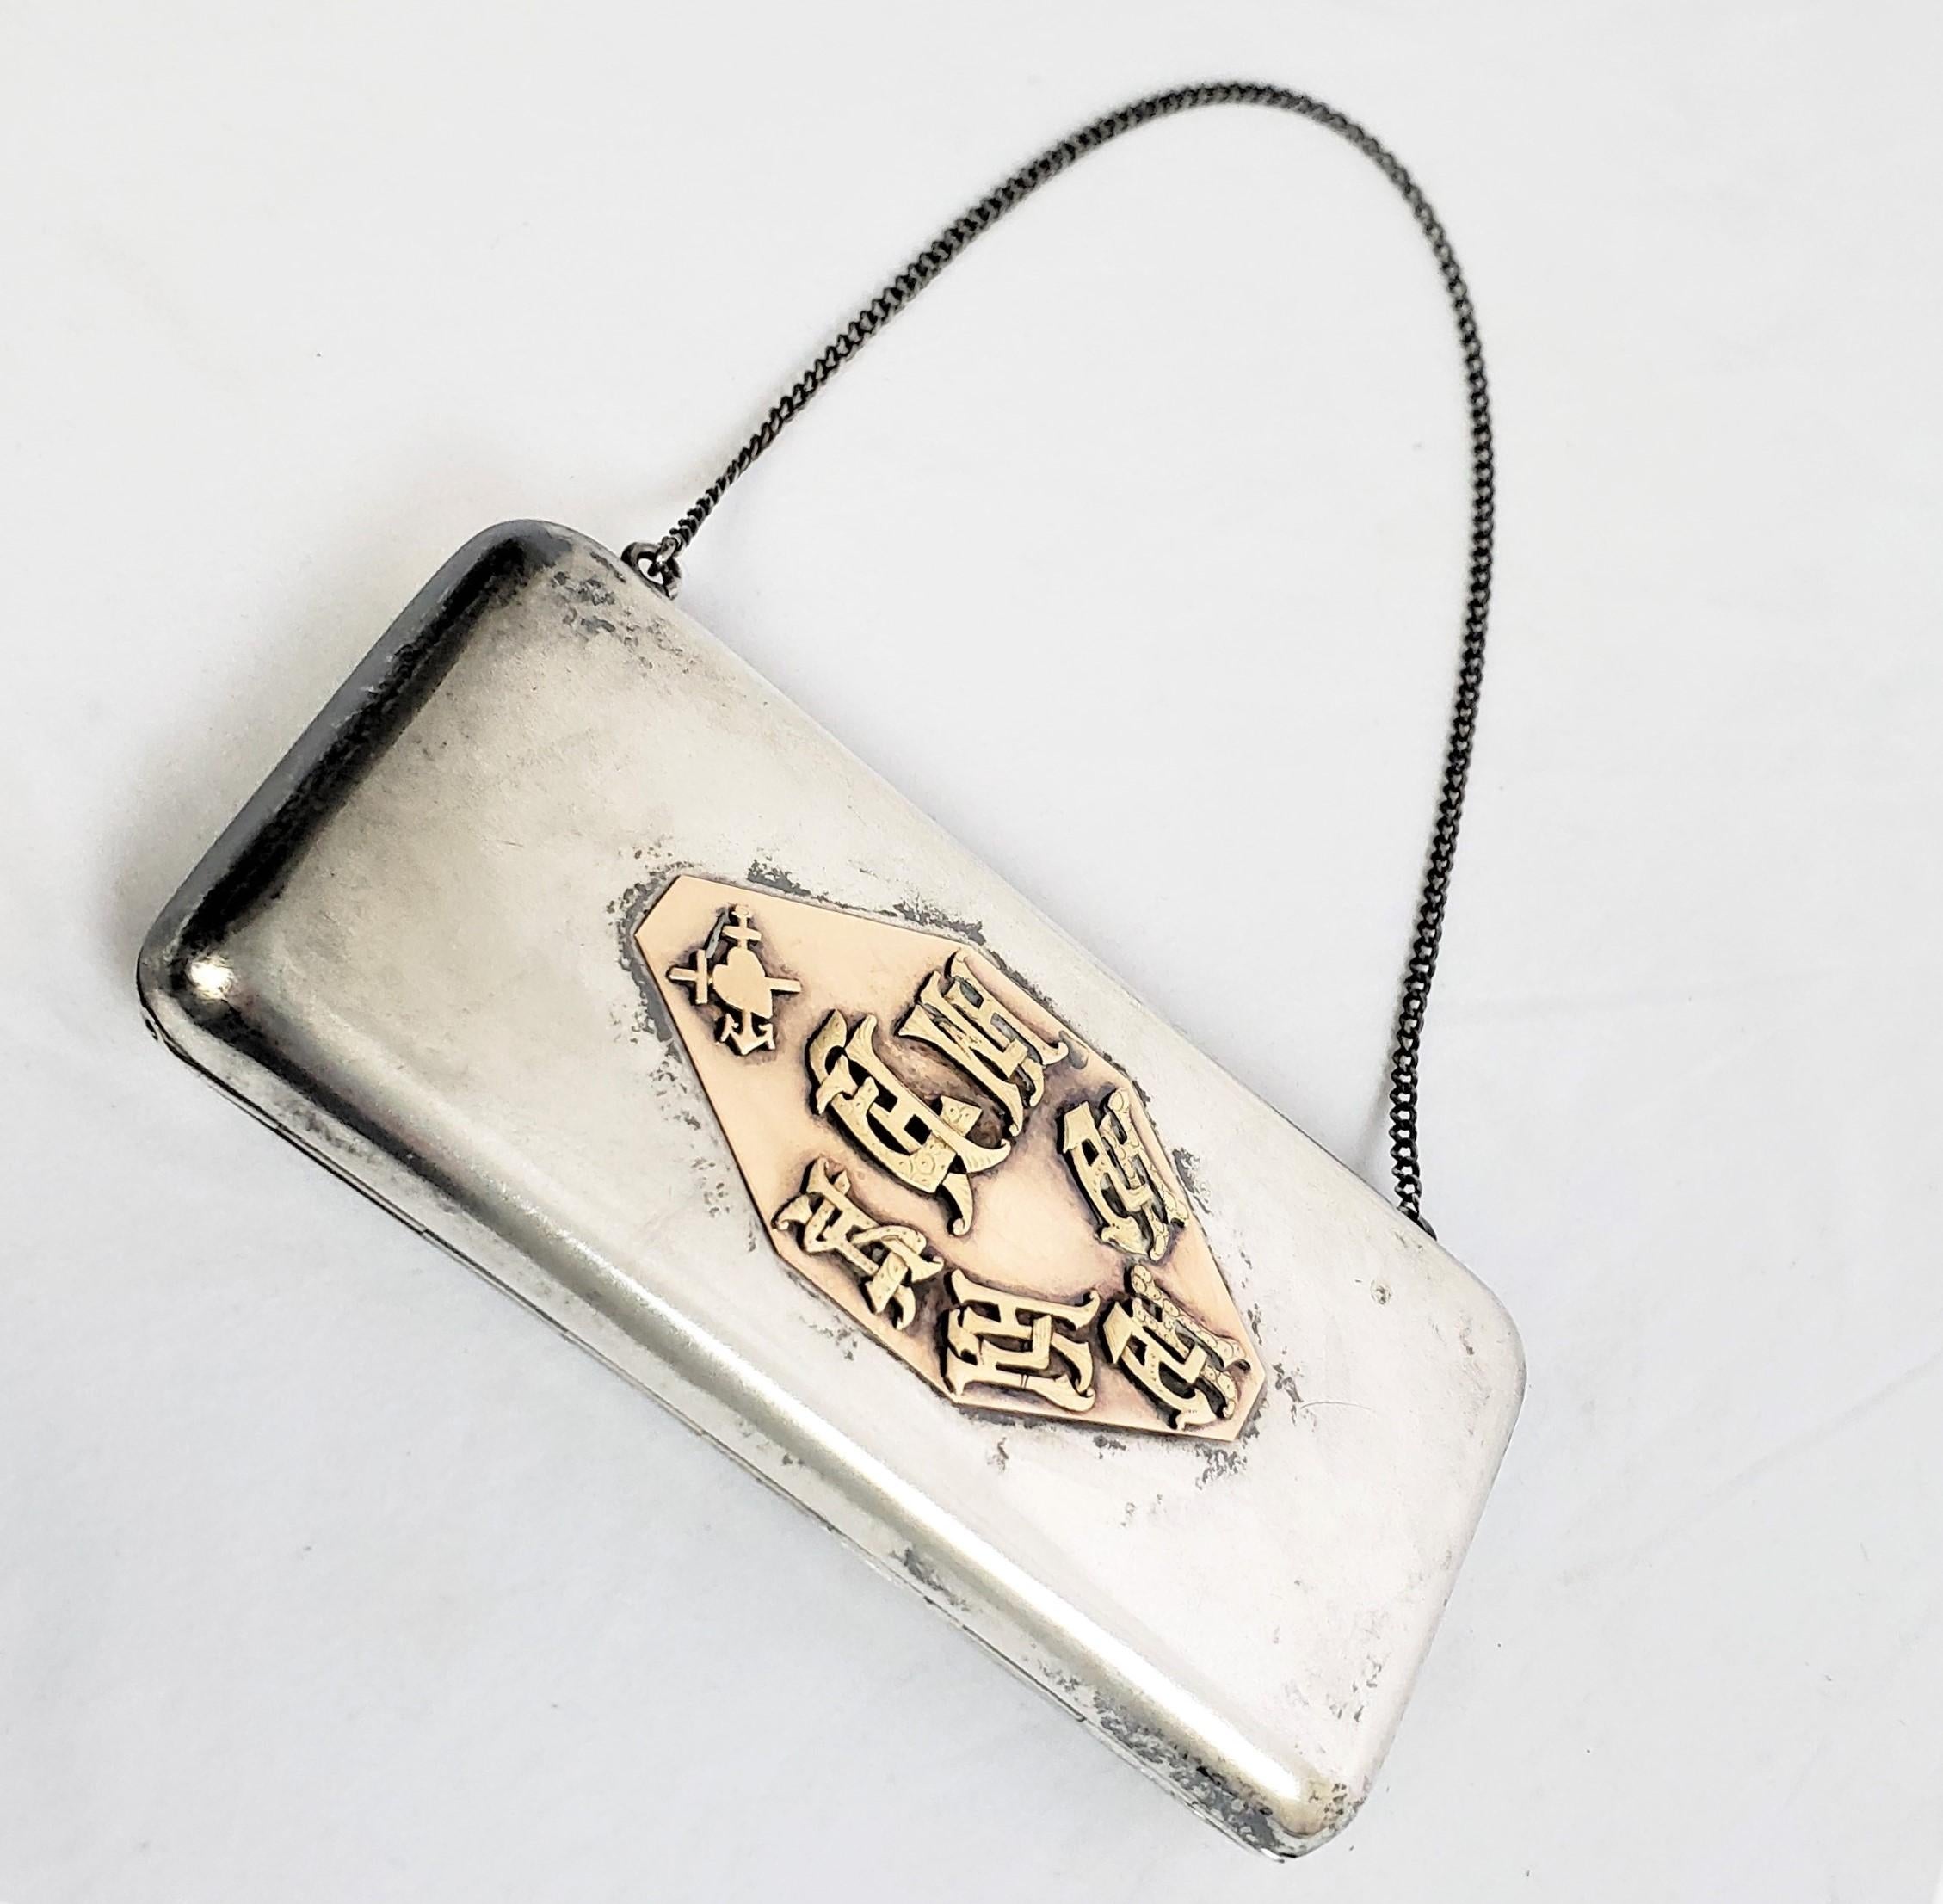 Antique Tsarist Russian Ladies Silver & Yellow Gold Clutch Purse or Evening Case In Good Condition For Sale In Hamilton, Ontario